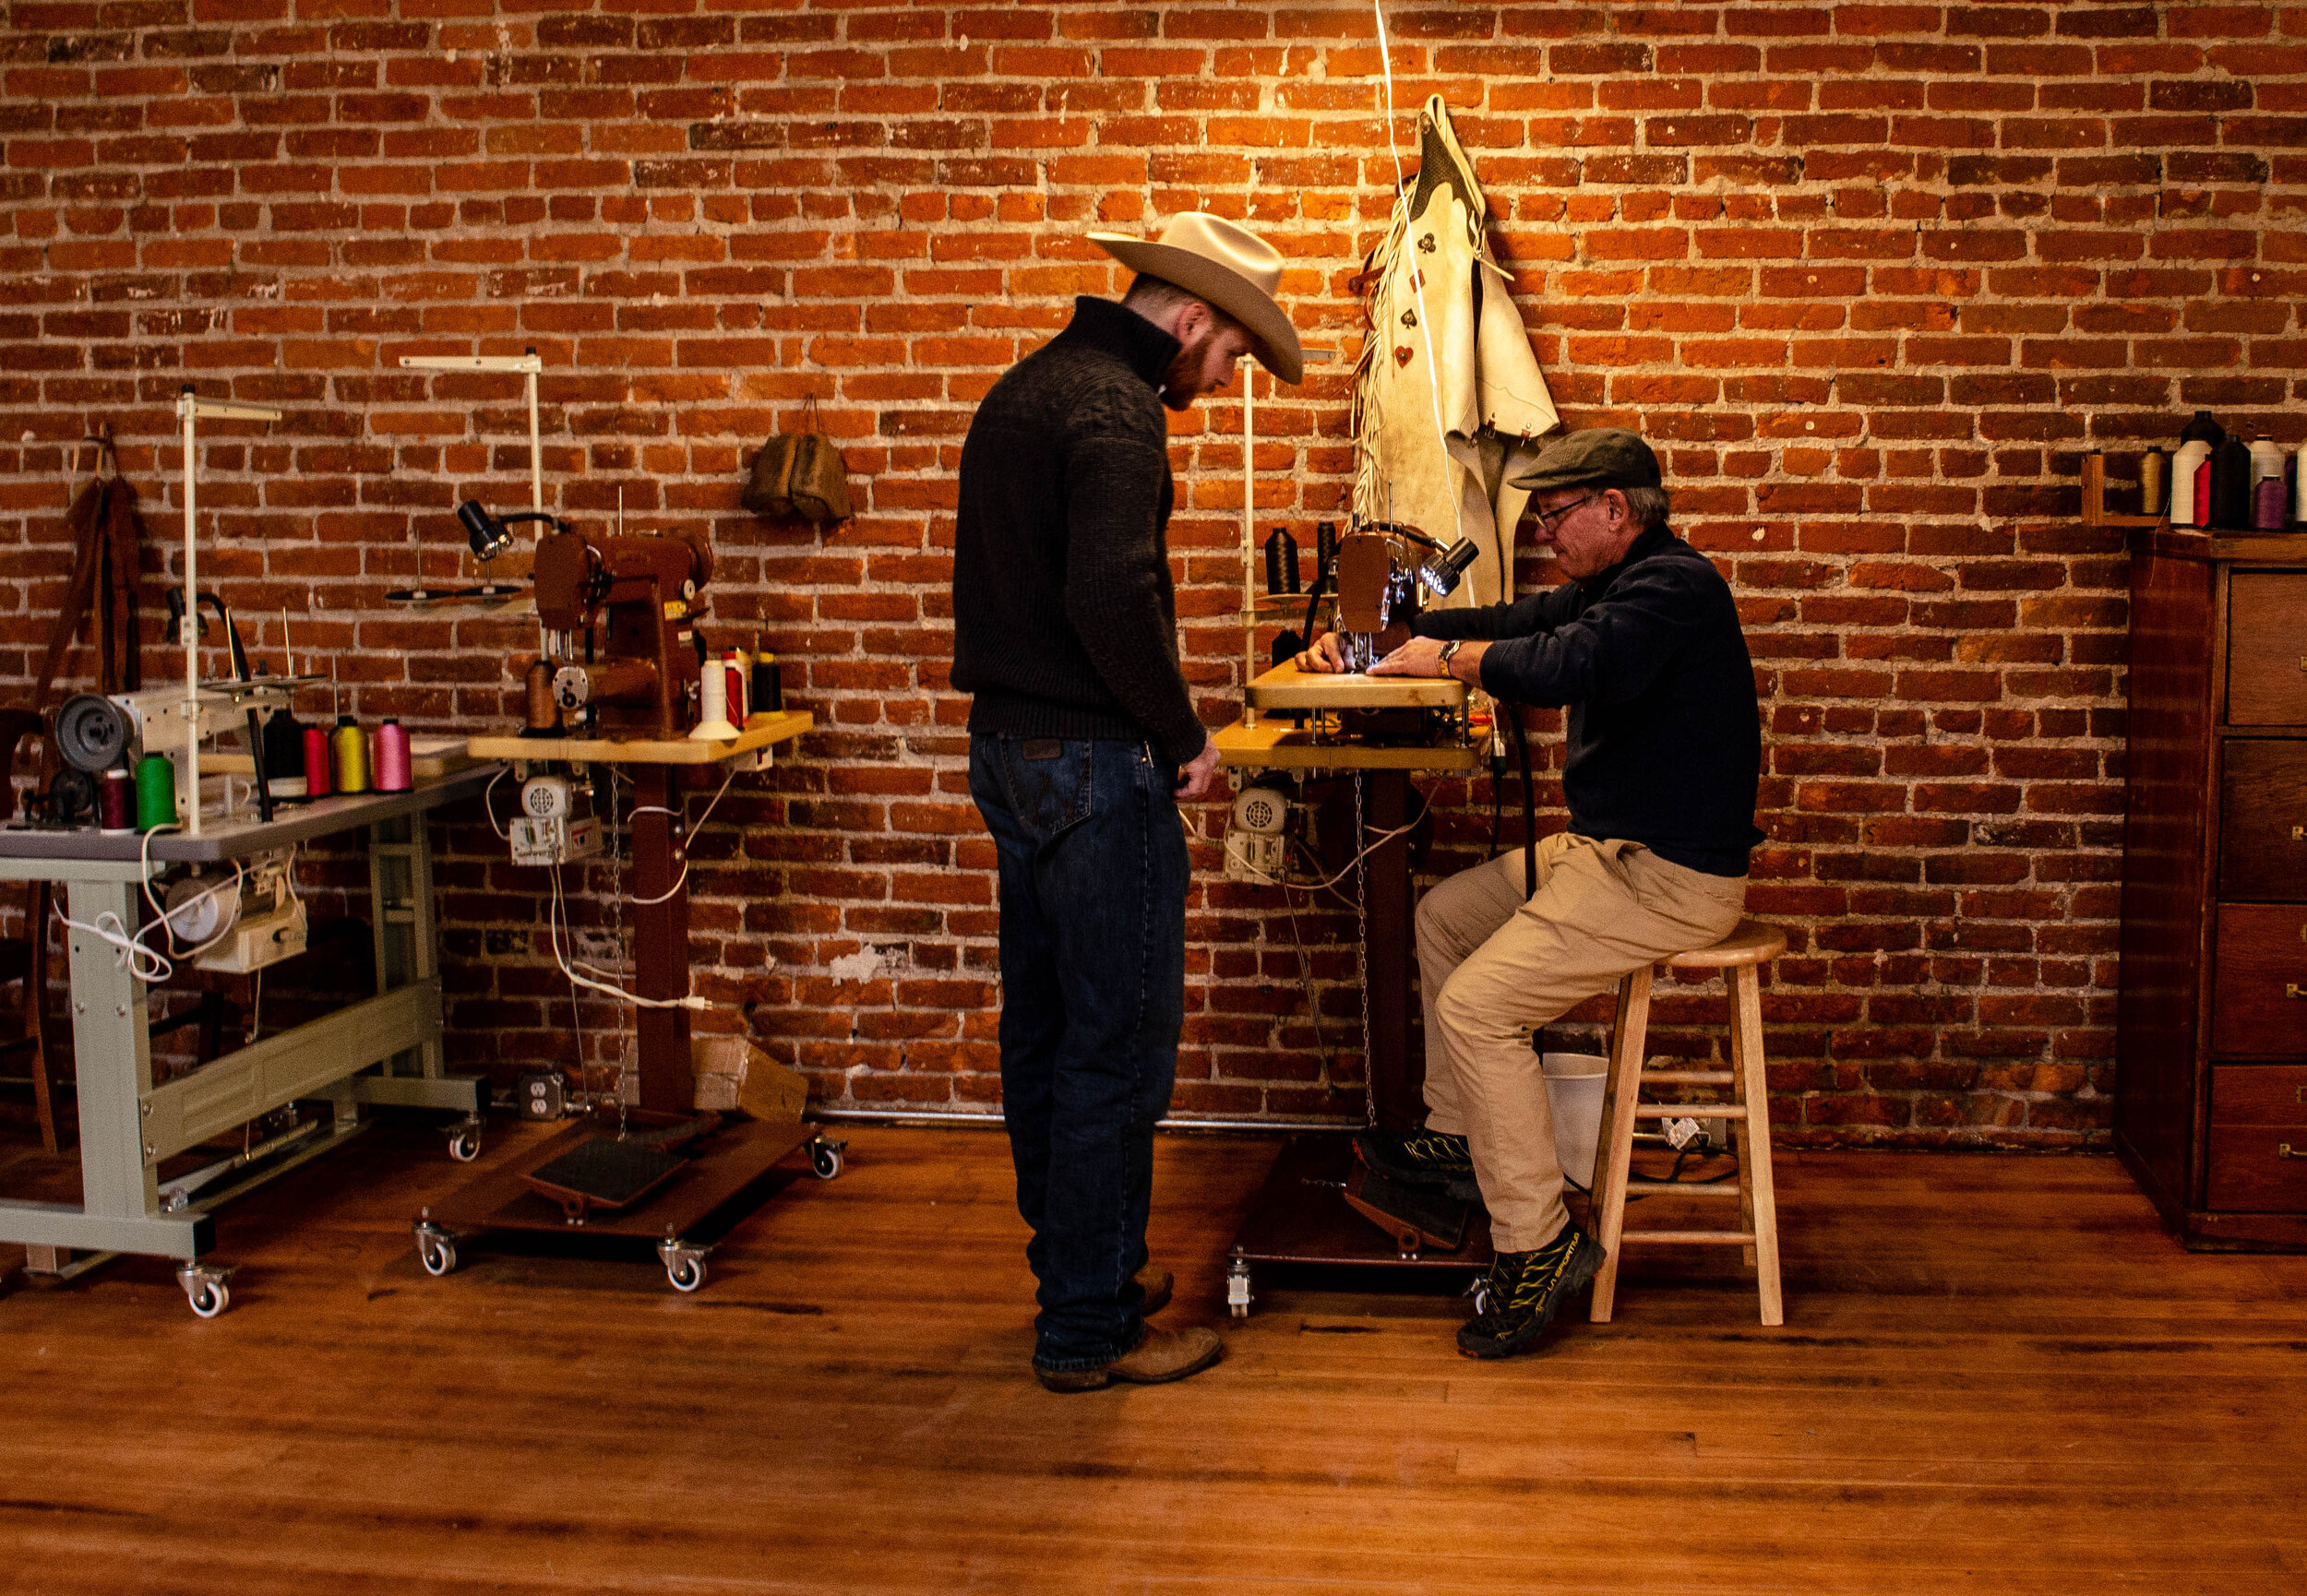 Tim observes student sewing leather in Burns, Oregon